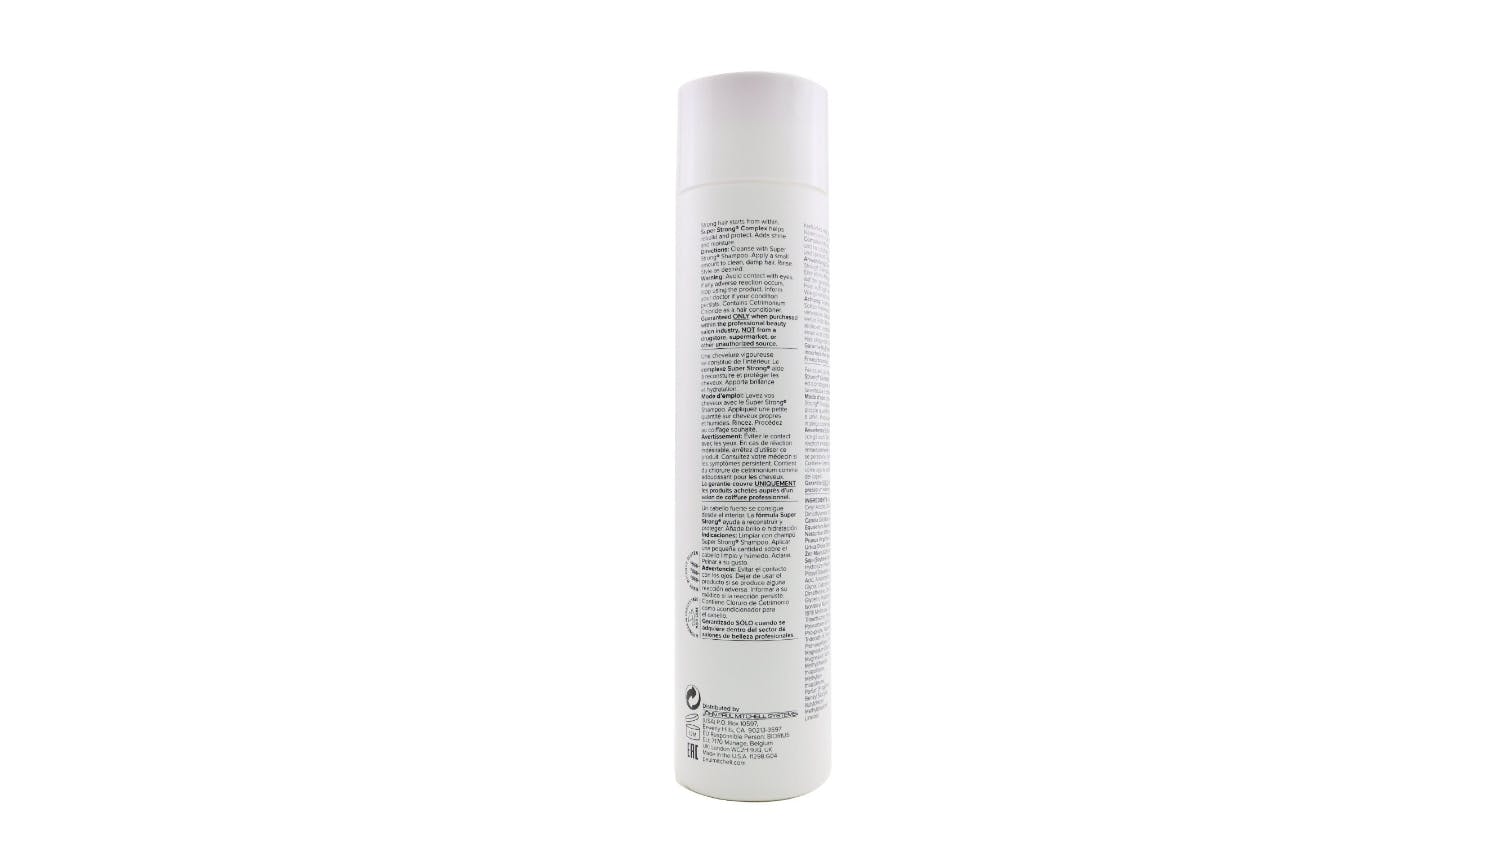 Paul Mitchell Super Strong Conditioner (Strengthens - Rebuilds) - 300ml/10.14oz